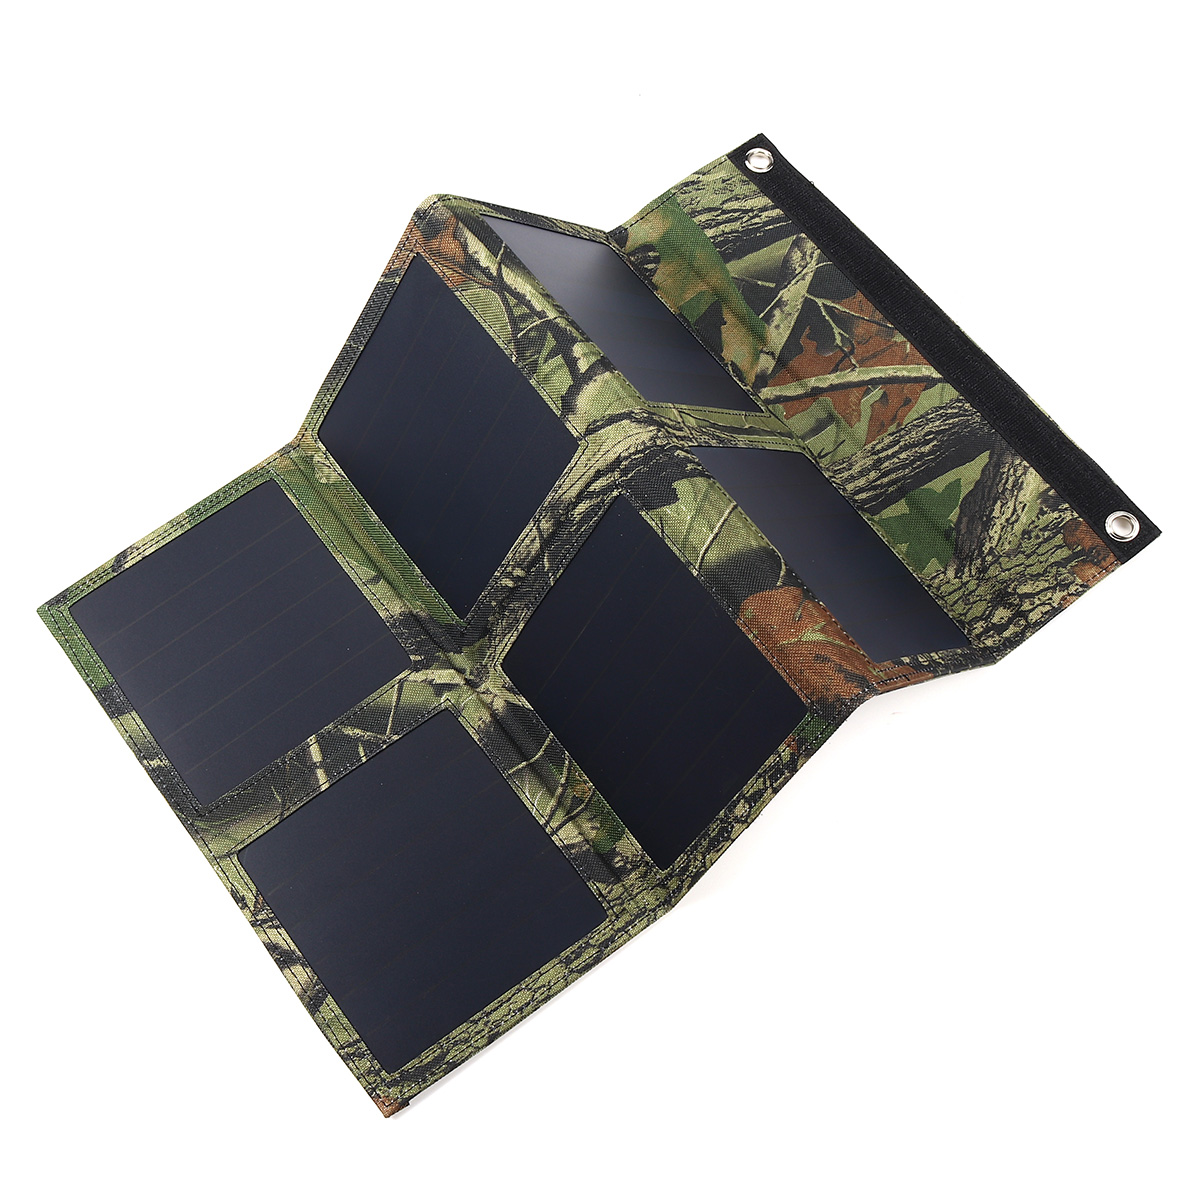 

25W 5V Foldable Solar Panel Charger Solar Power Bank Dual USB Camouflage Backpack Camping Hiking for Huawei iPhone Samsung